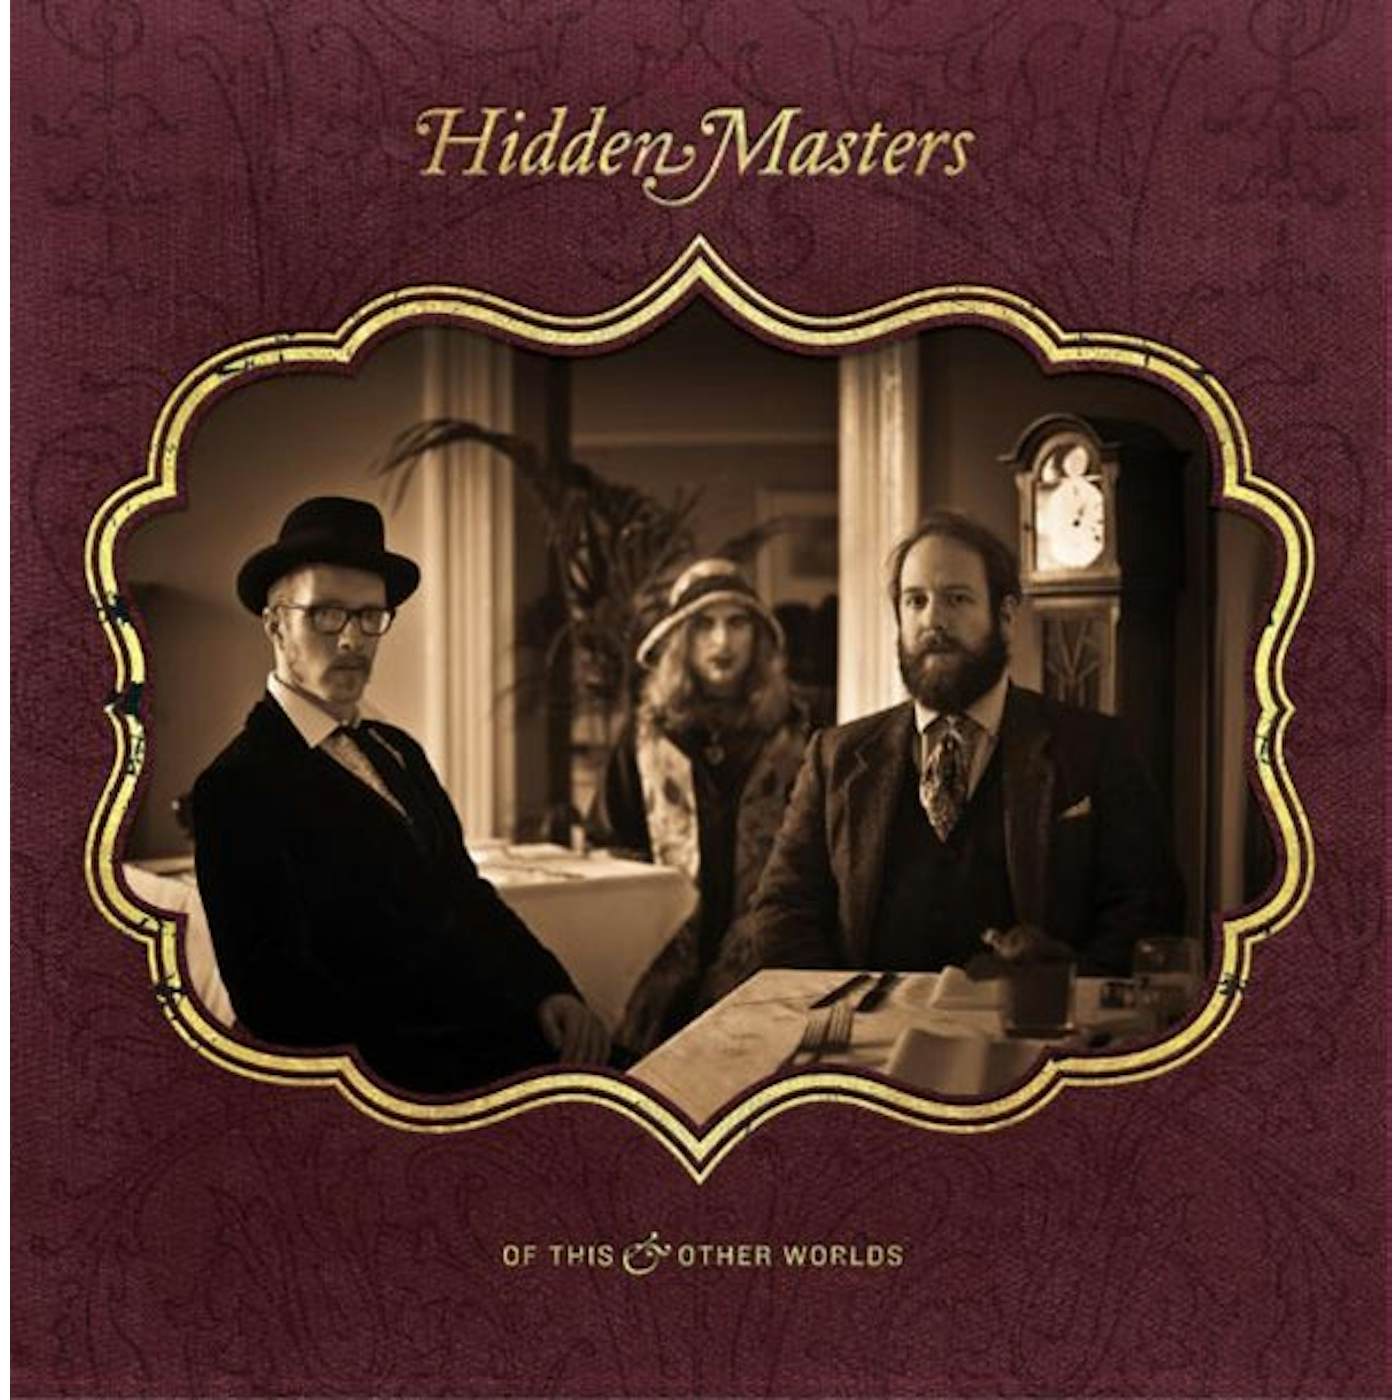 Hidden Masters LP - Of This And Other Worlds (Vinyl)